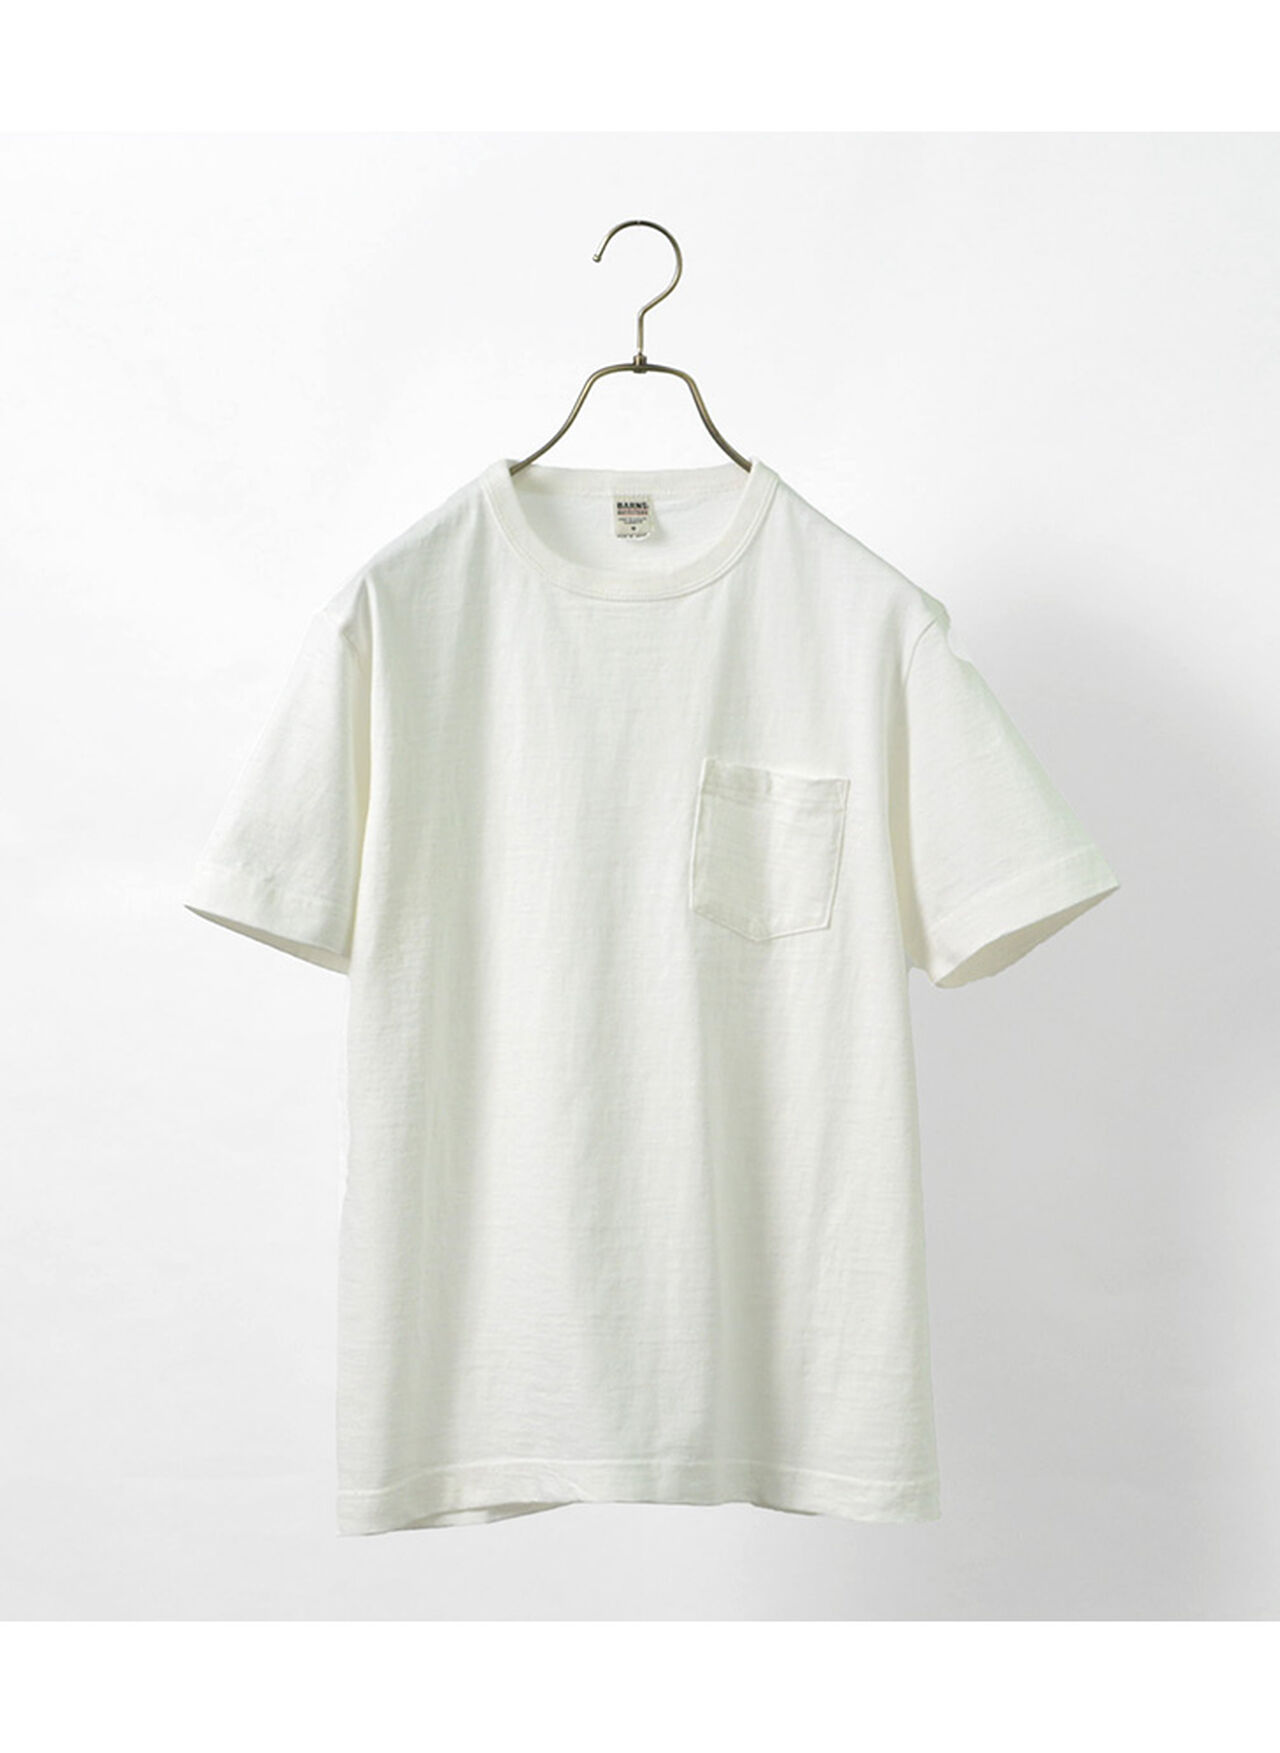 BR-1100 Hanging jersey S/S Crew neck,, large image number 3